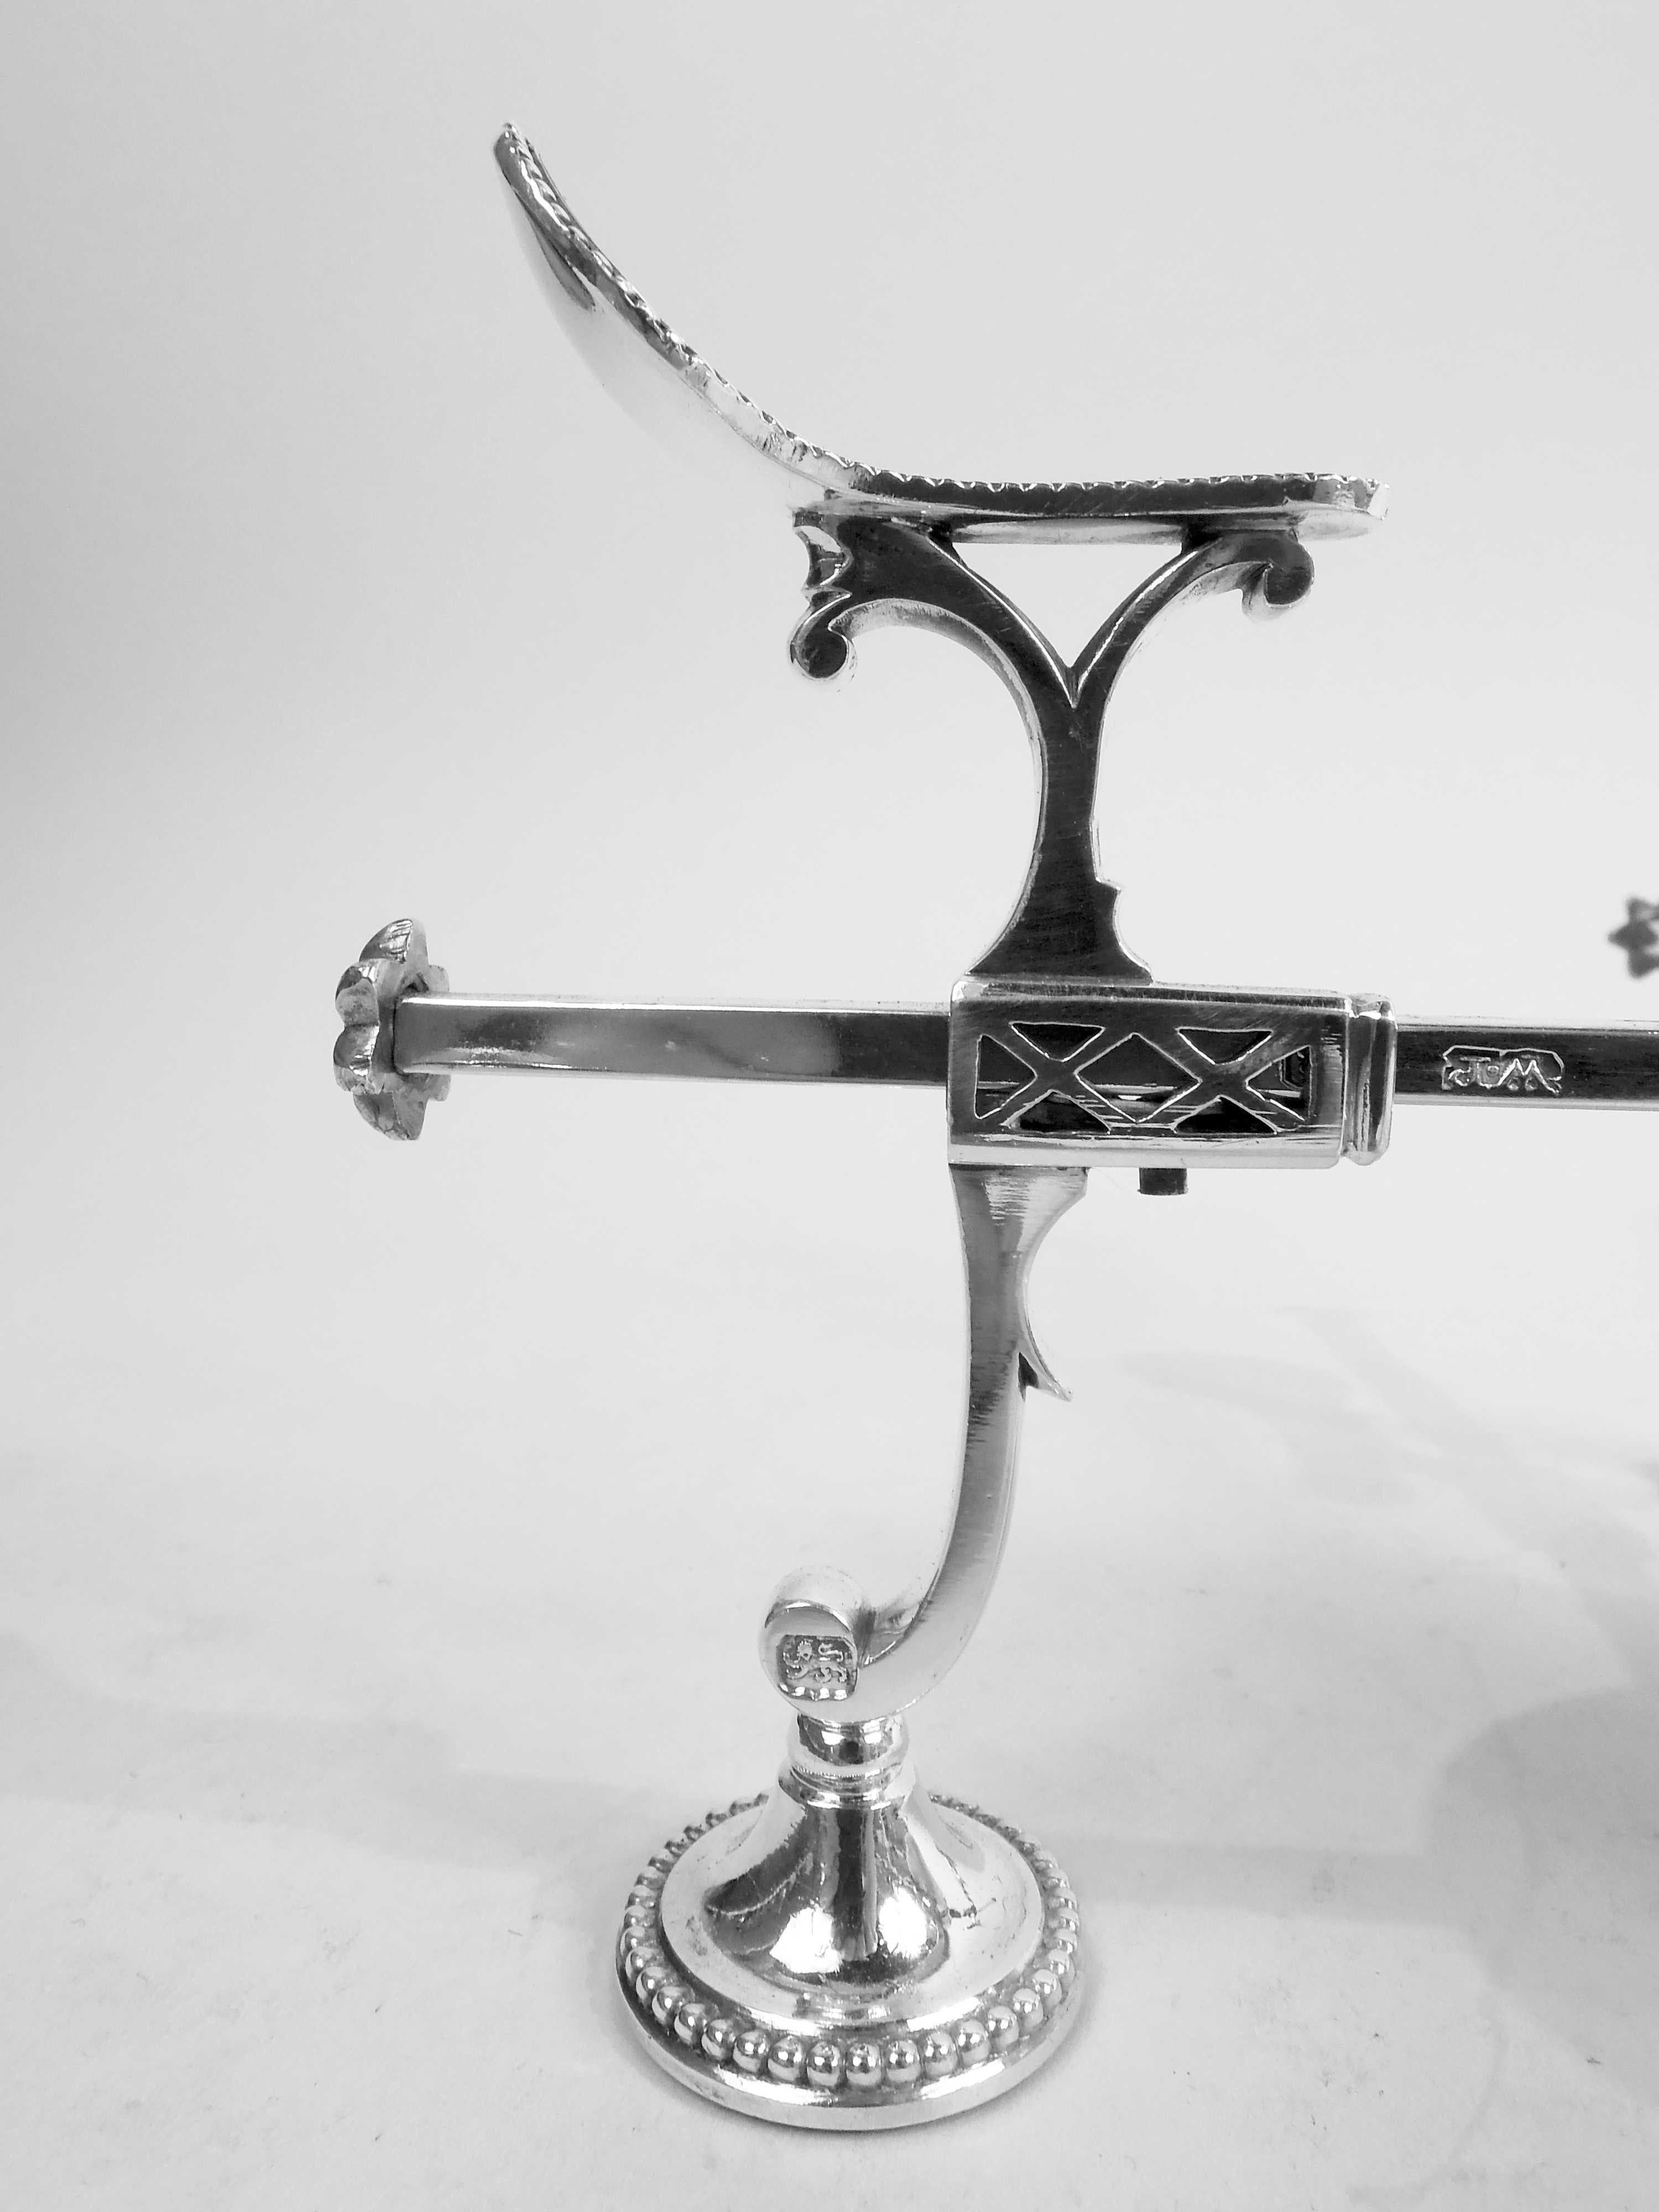 George III sterling silver dish cross. Made by William Plummer in London in 1783. Central baluster spirit lamp to which are mounted two bars; two more bars mounted to rotating top. Each bar has slide-adjustable cradle and end guard in form of cast